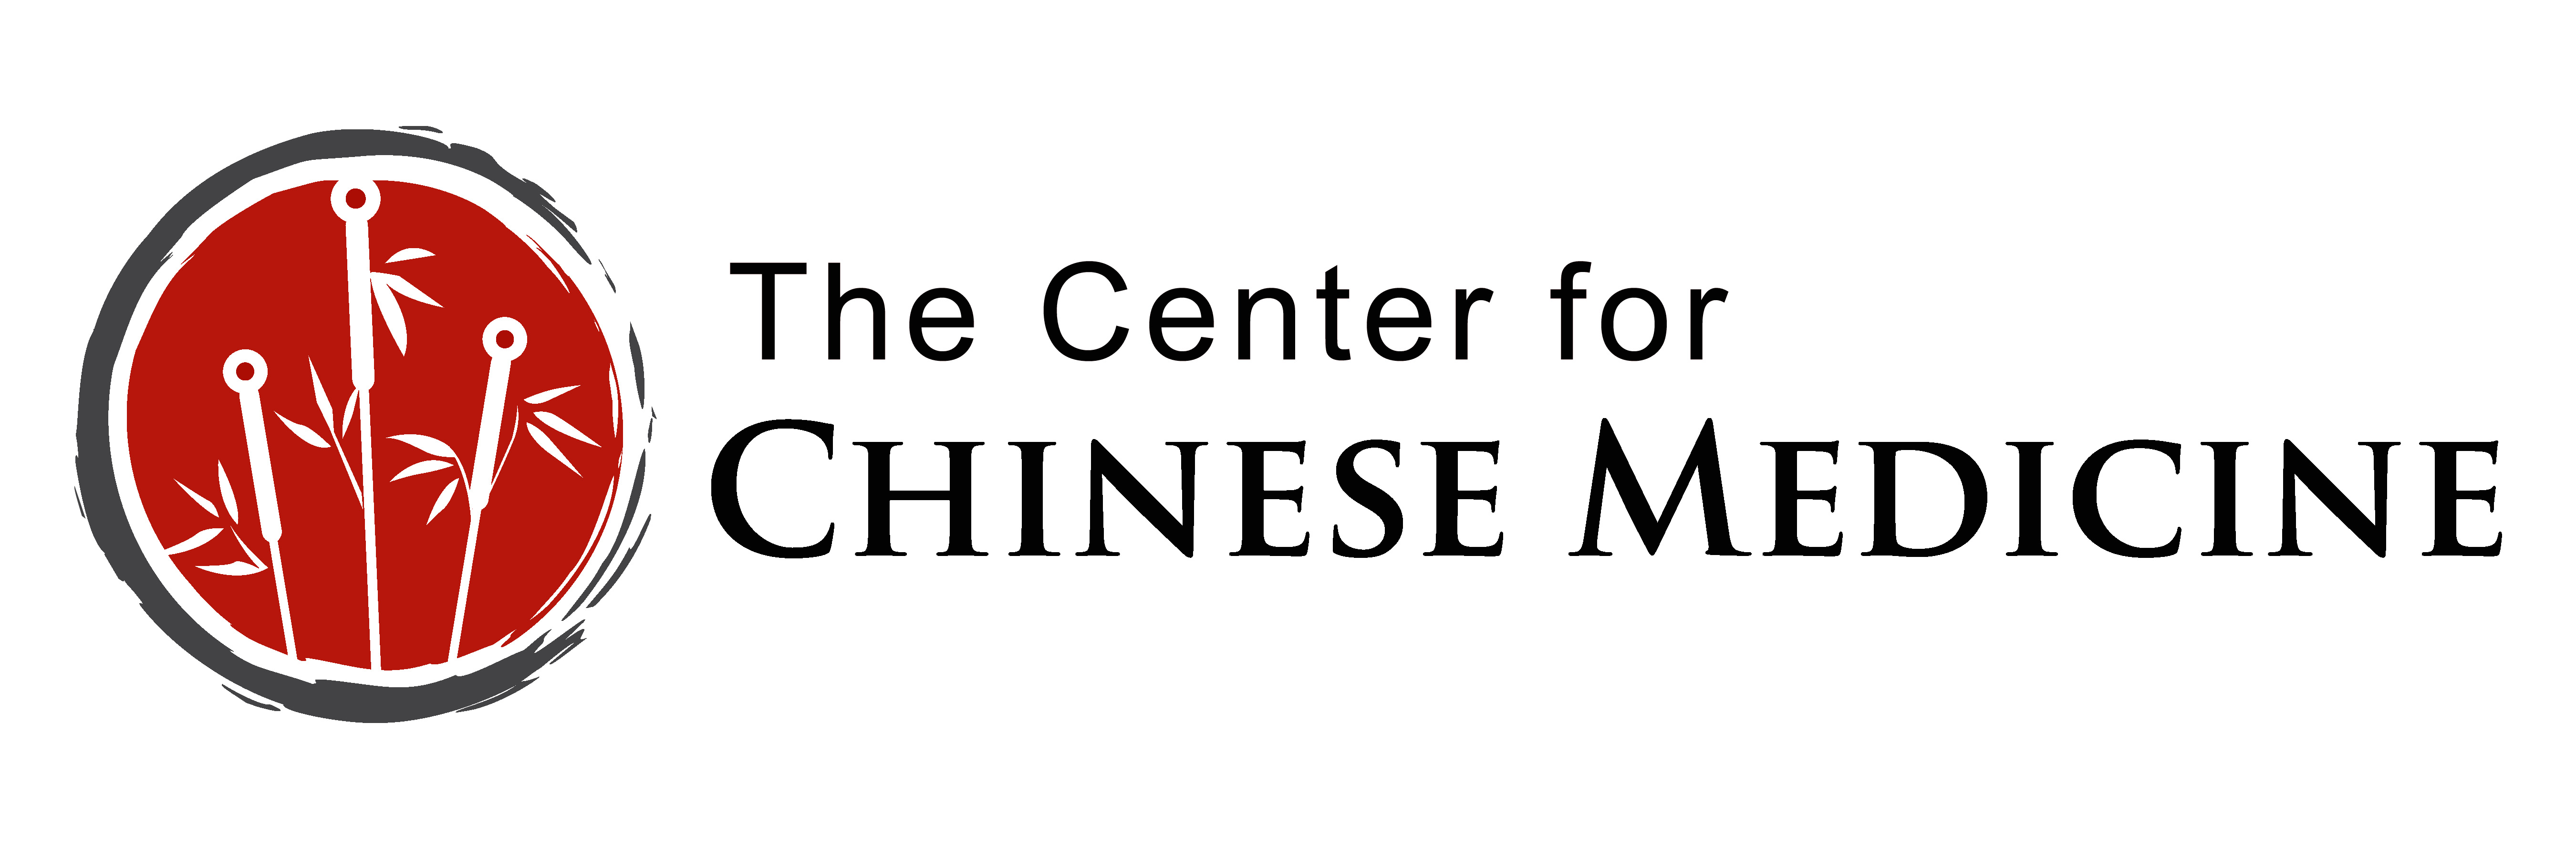 The Center for Chinese Medicine